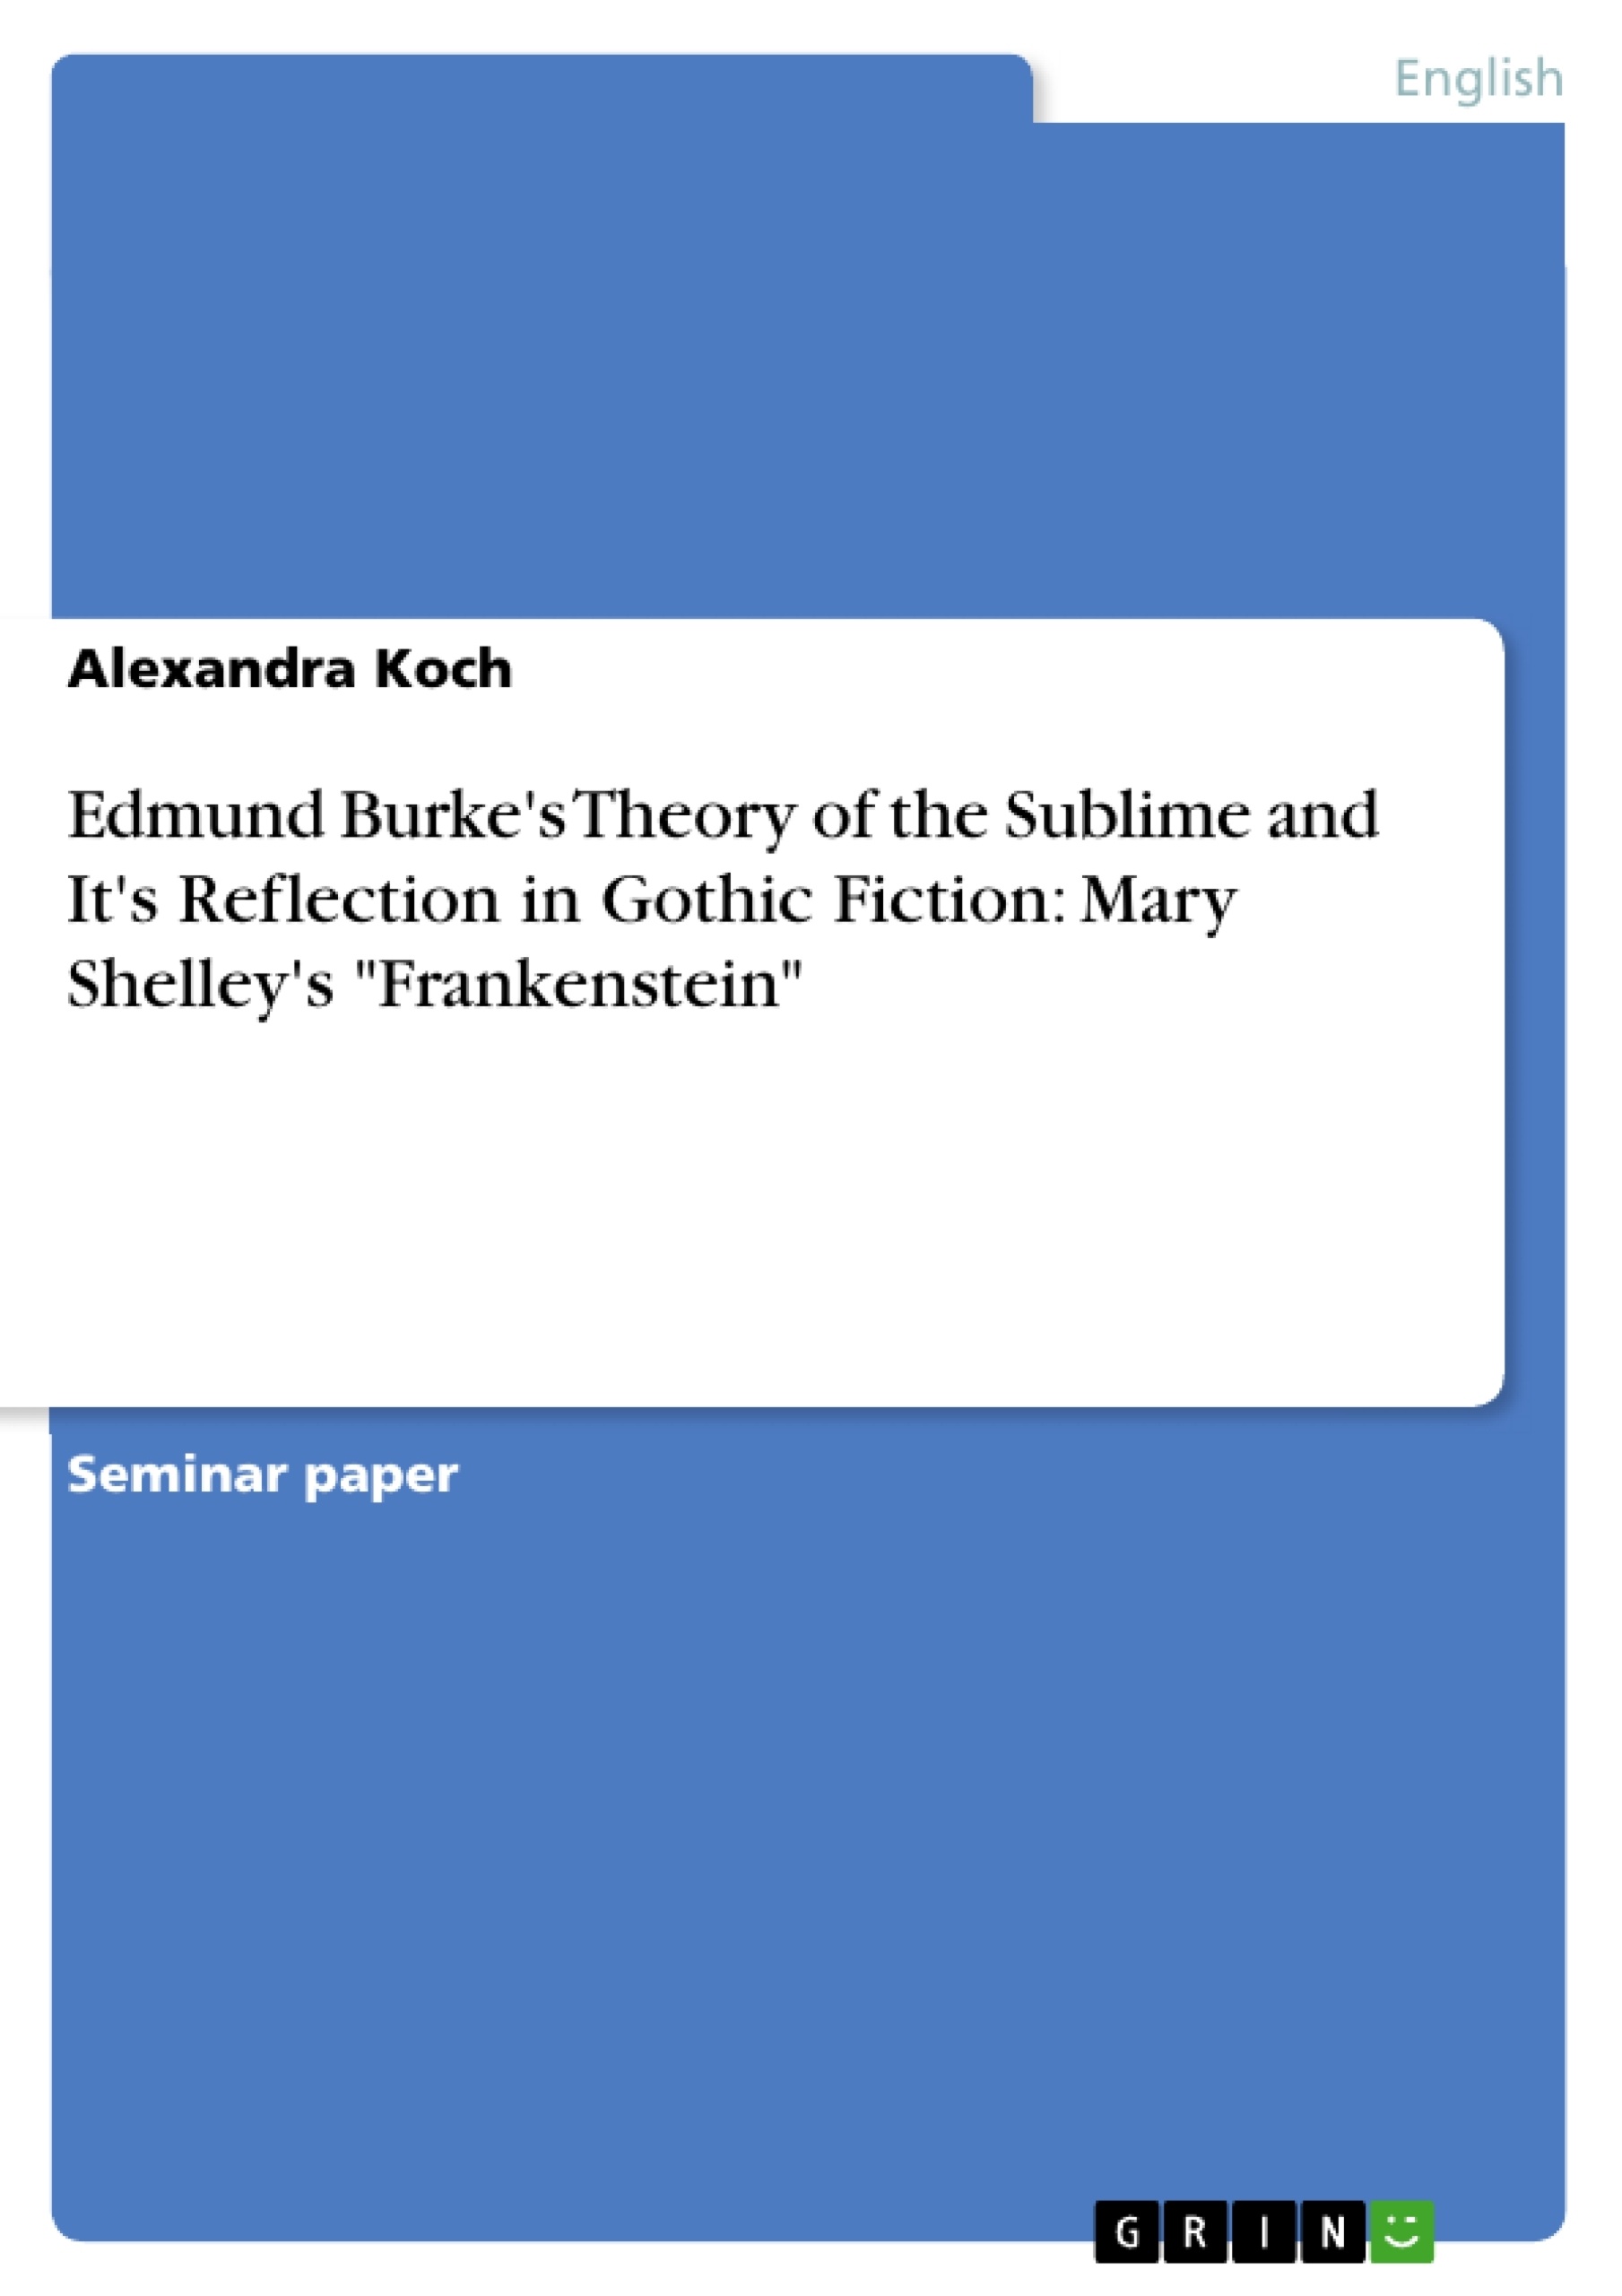 Titel: Edmund Burke's Theory of the Sublime and It's Reflection in Gothic Fiction: Mary Shelley's "Frankenstein"